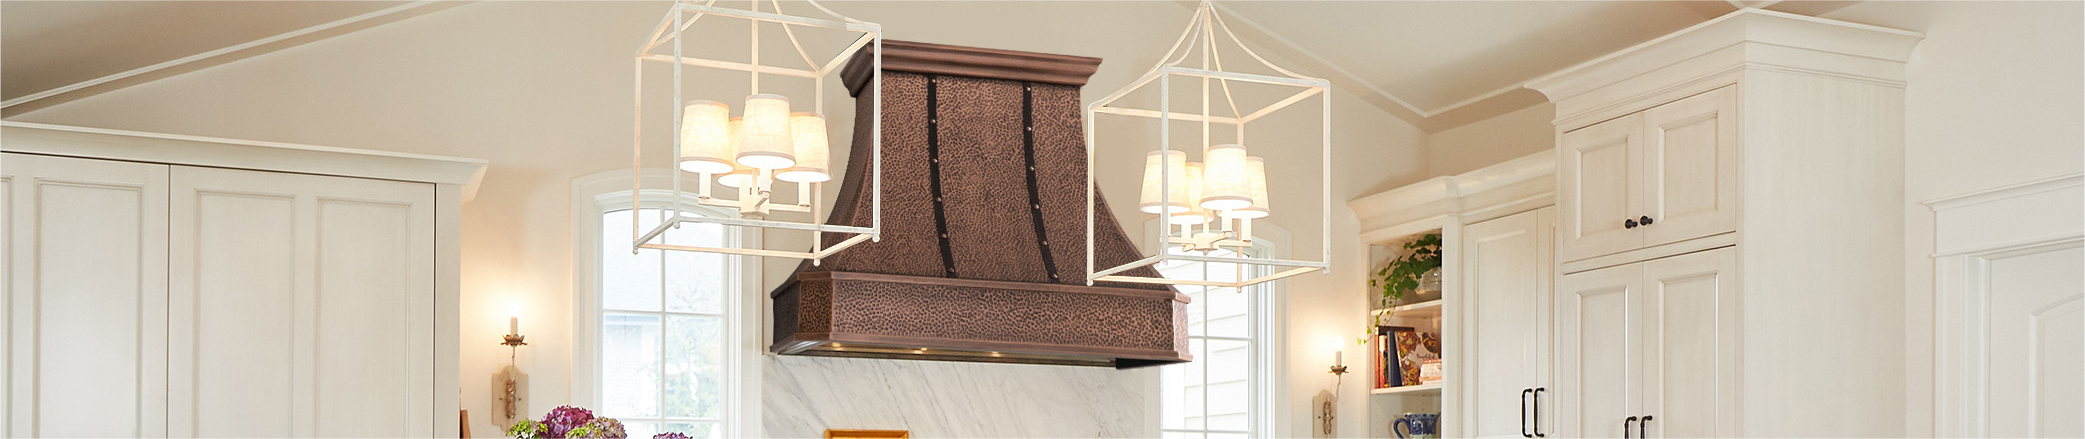 Fobest custom copper range hood with two straps and rivets